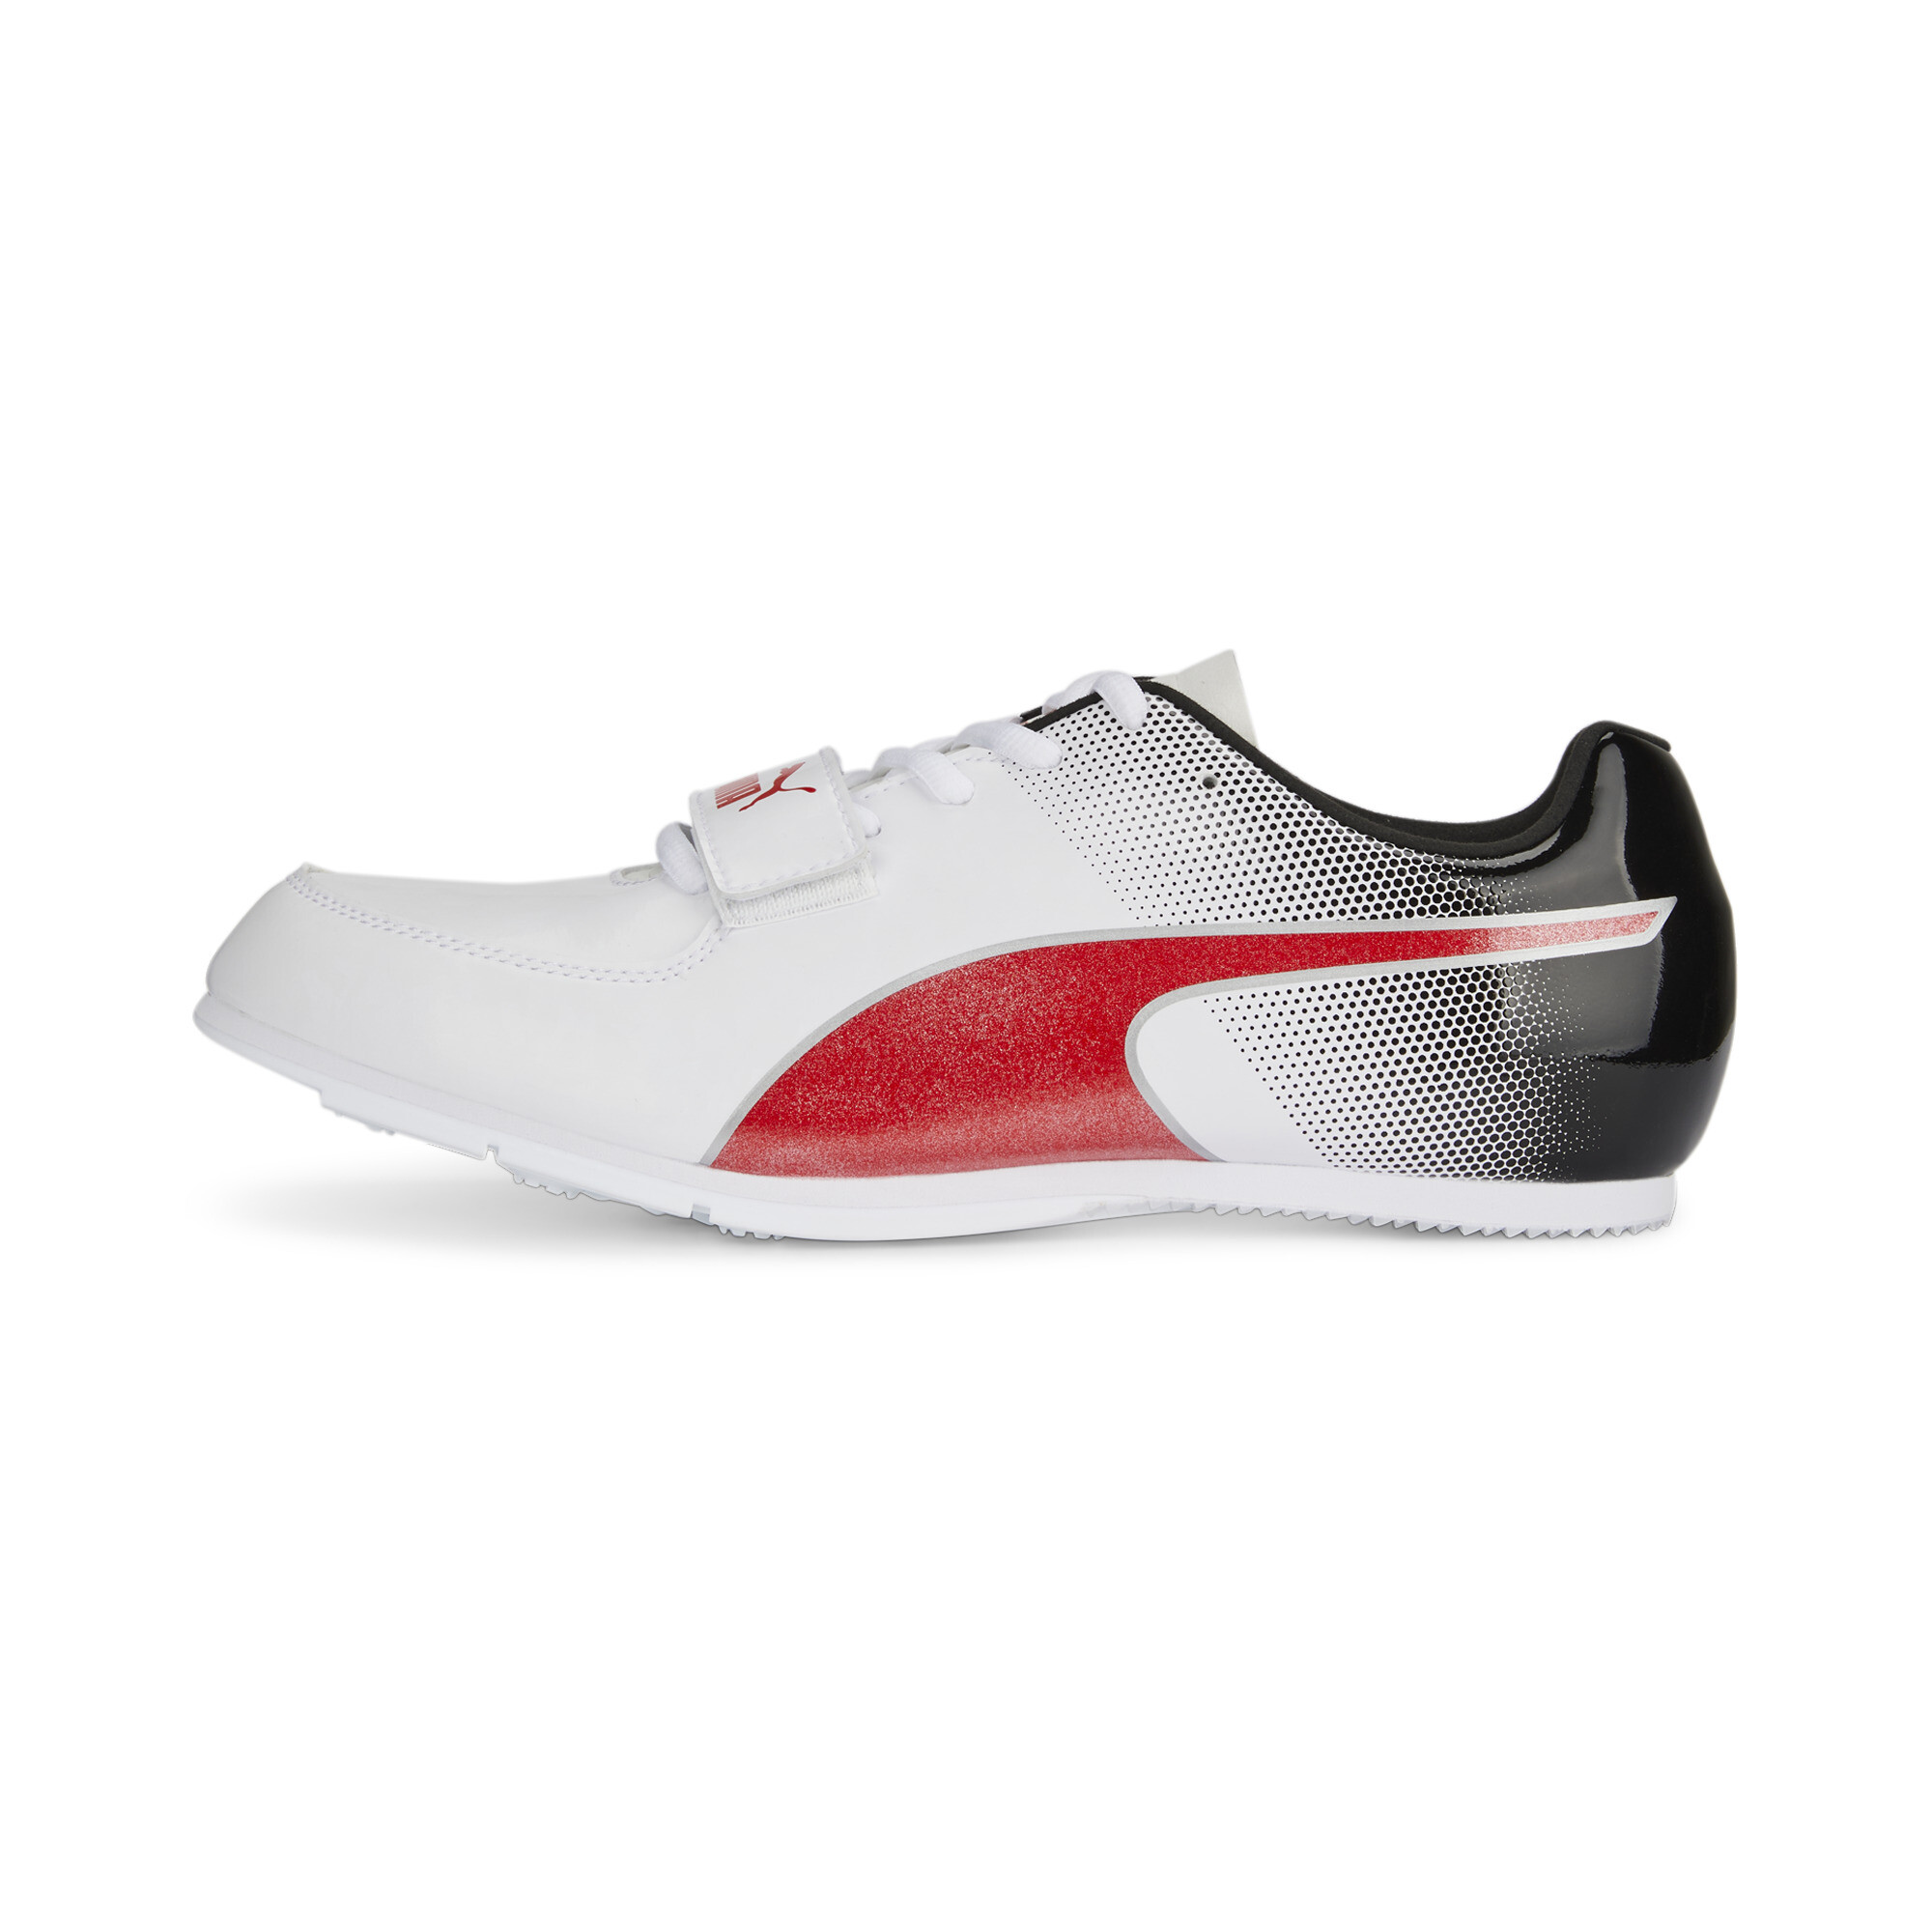 Puma Evo SPEED Long Jump 10 Track And Field Shoes, White, Size 41, Shoes